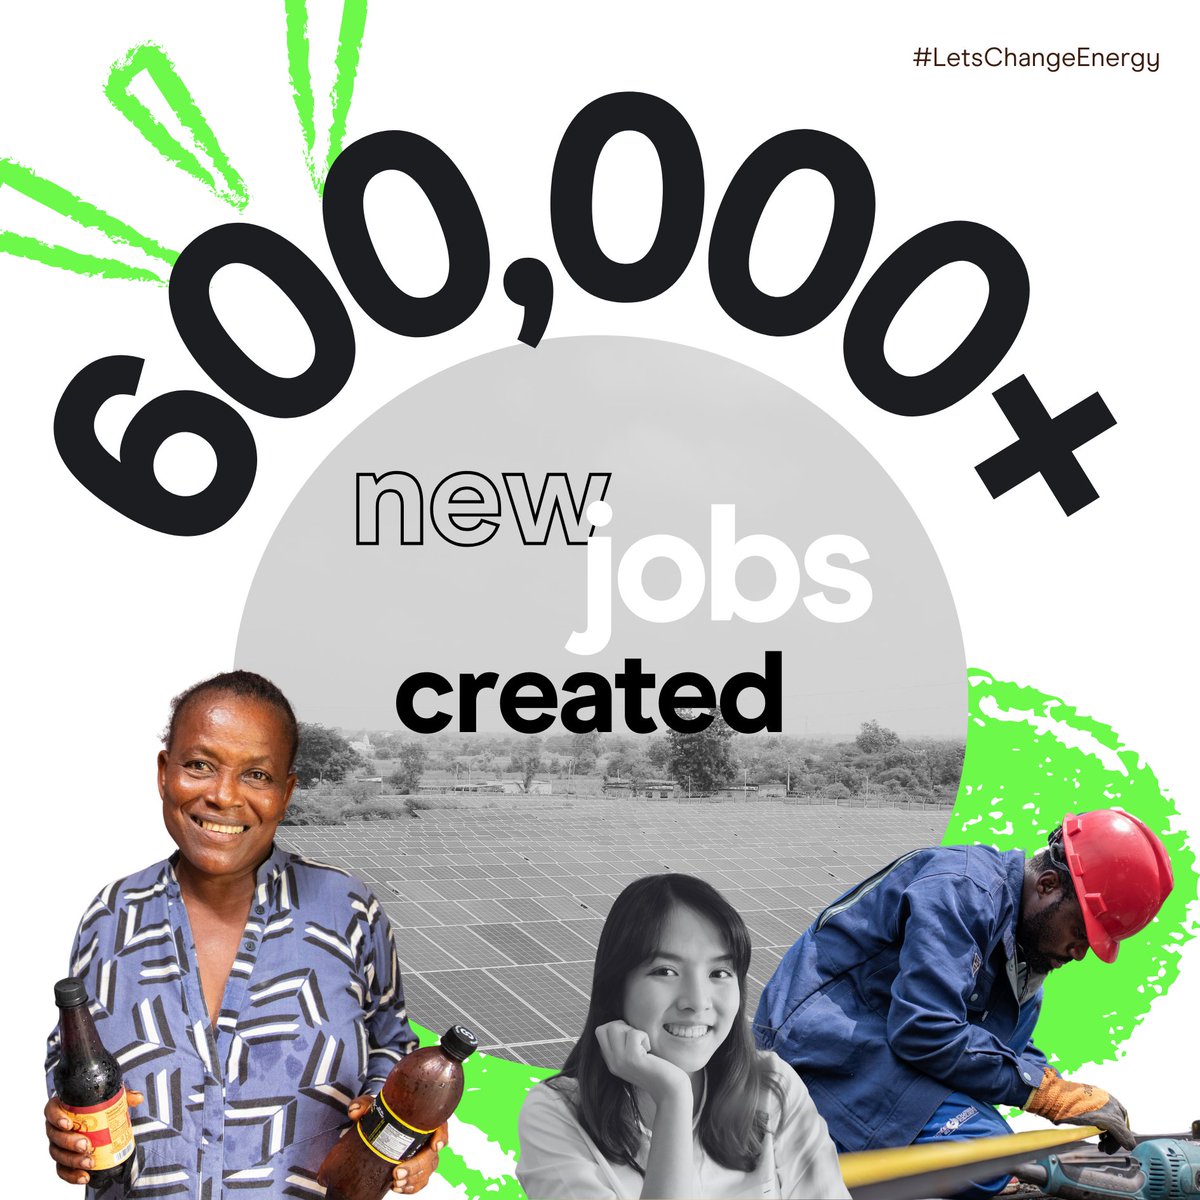 By making big bets, @EnergyAlliance has created over 600,000 new jobs in the energy sector since COP26. 

Read more from their 2023 Powering People & Planet Report: energyalliance.org/powering-peopl… #LetsChangeEnergy